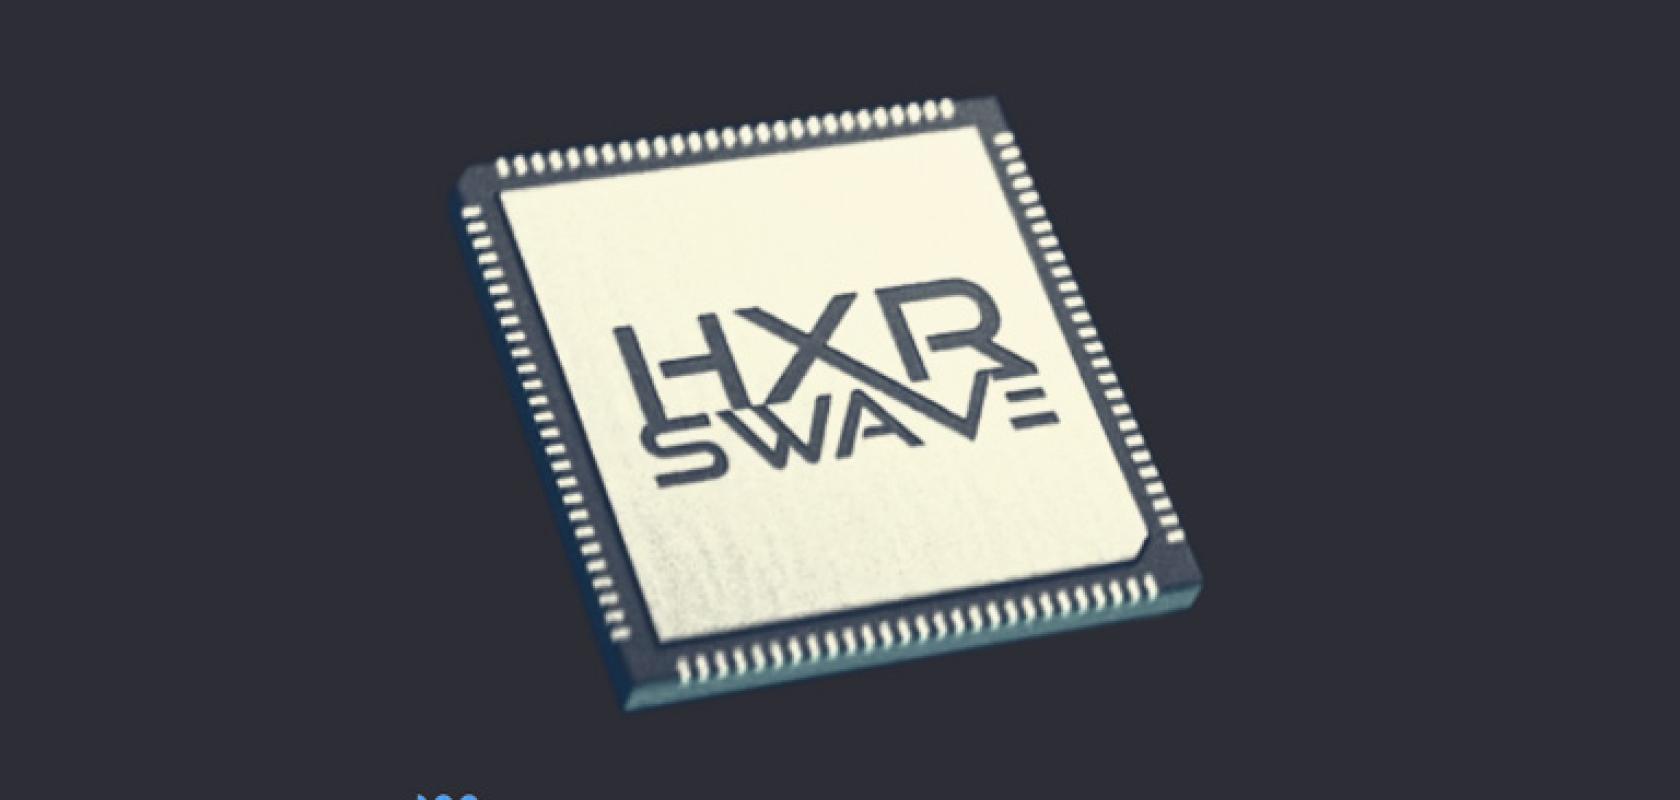 Swave’s Holographic eXtended Reality (HXR) chip creates pixels small enough to steer light, rendering vivid 3D images.